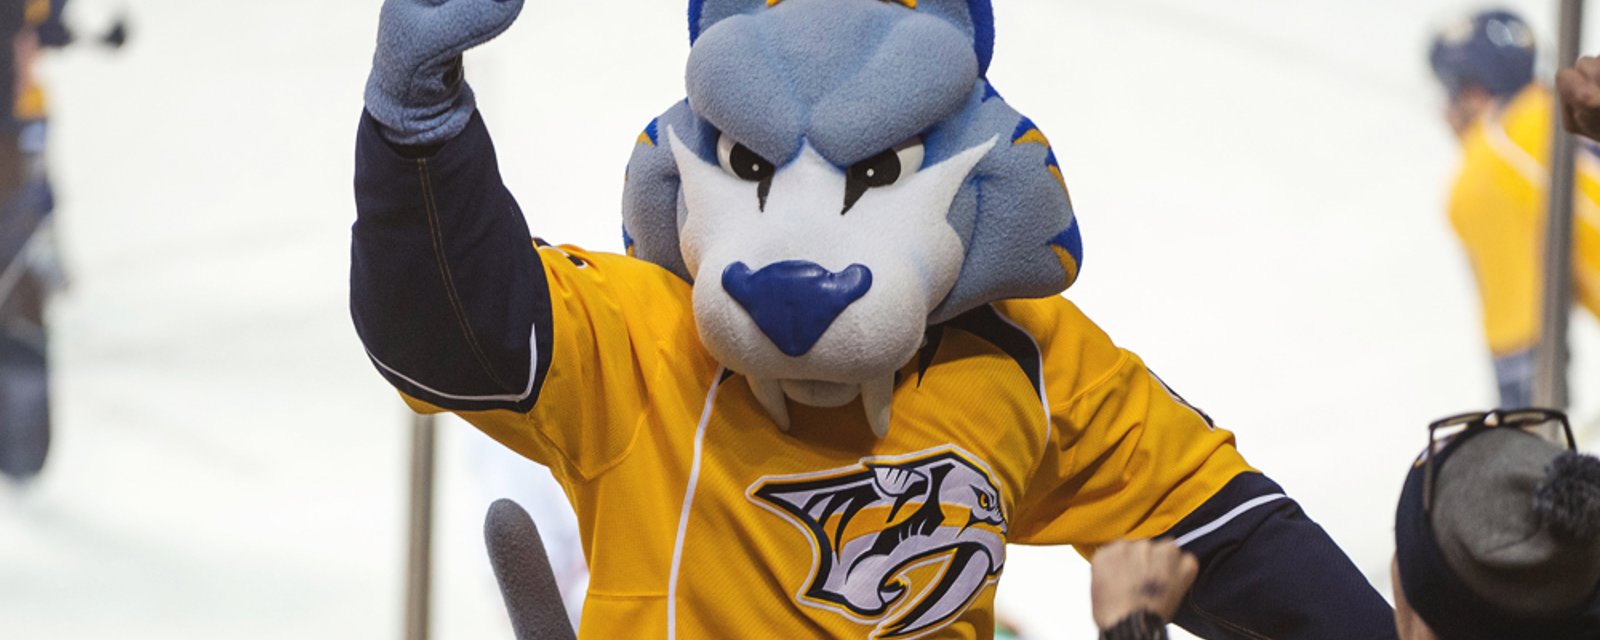 NHL Mascot faces harsh fine after inappropriate comments on Twitter.